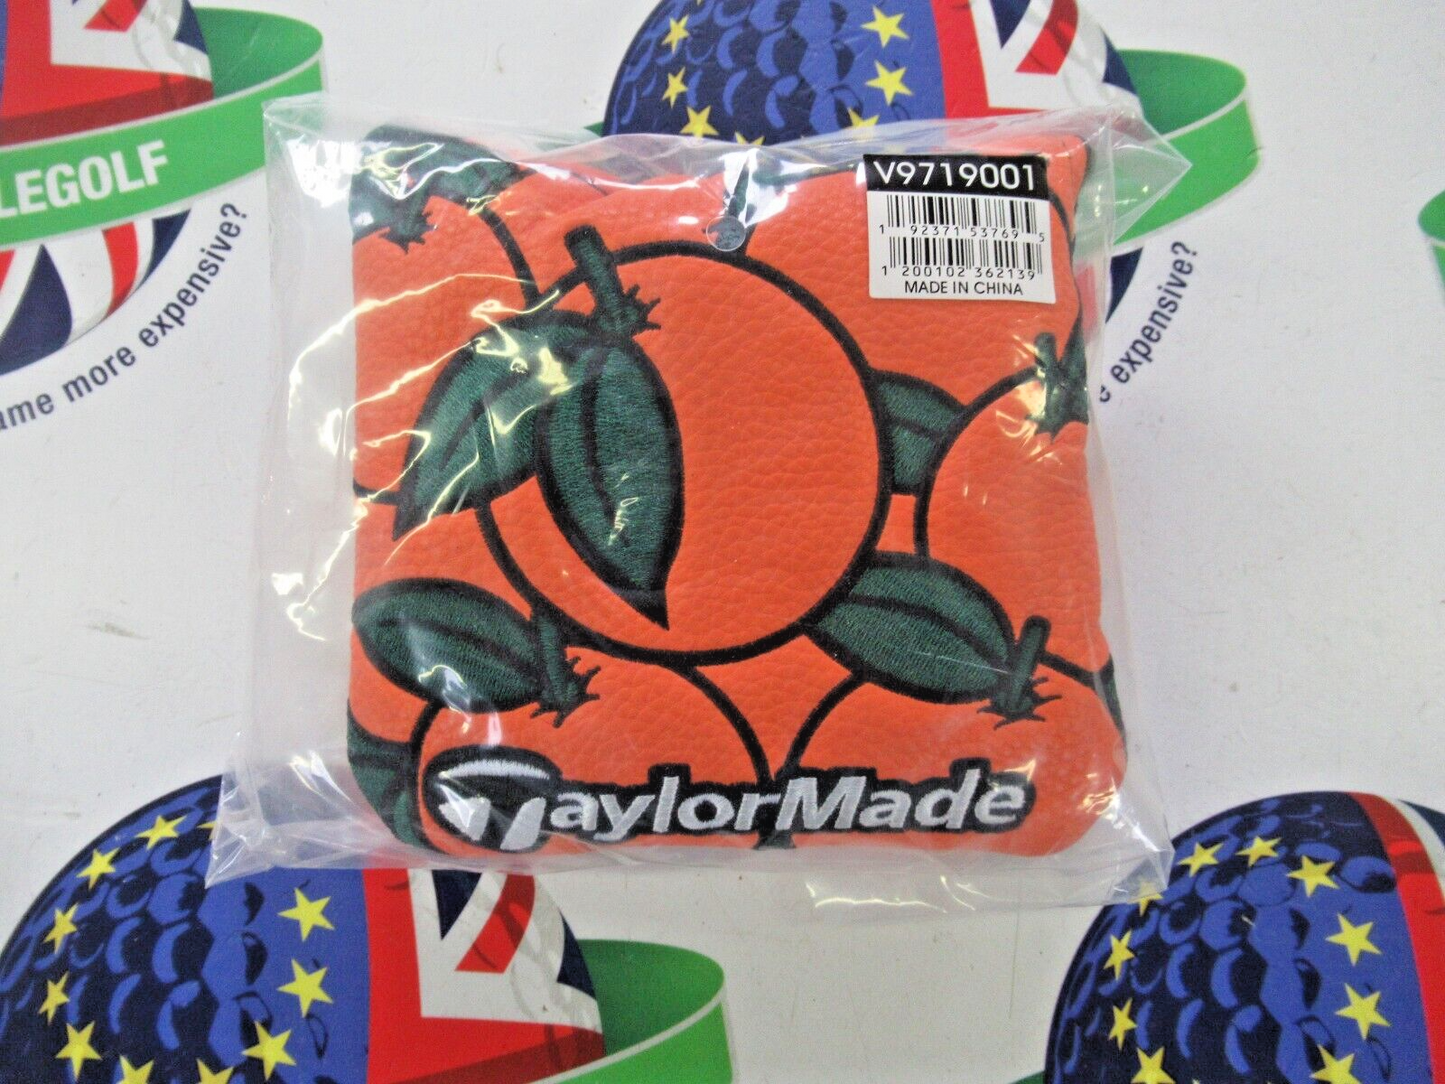 new taylormade vault limited edition freshly squeezed mallet putter head cover